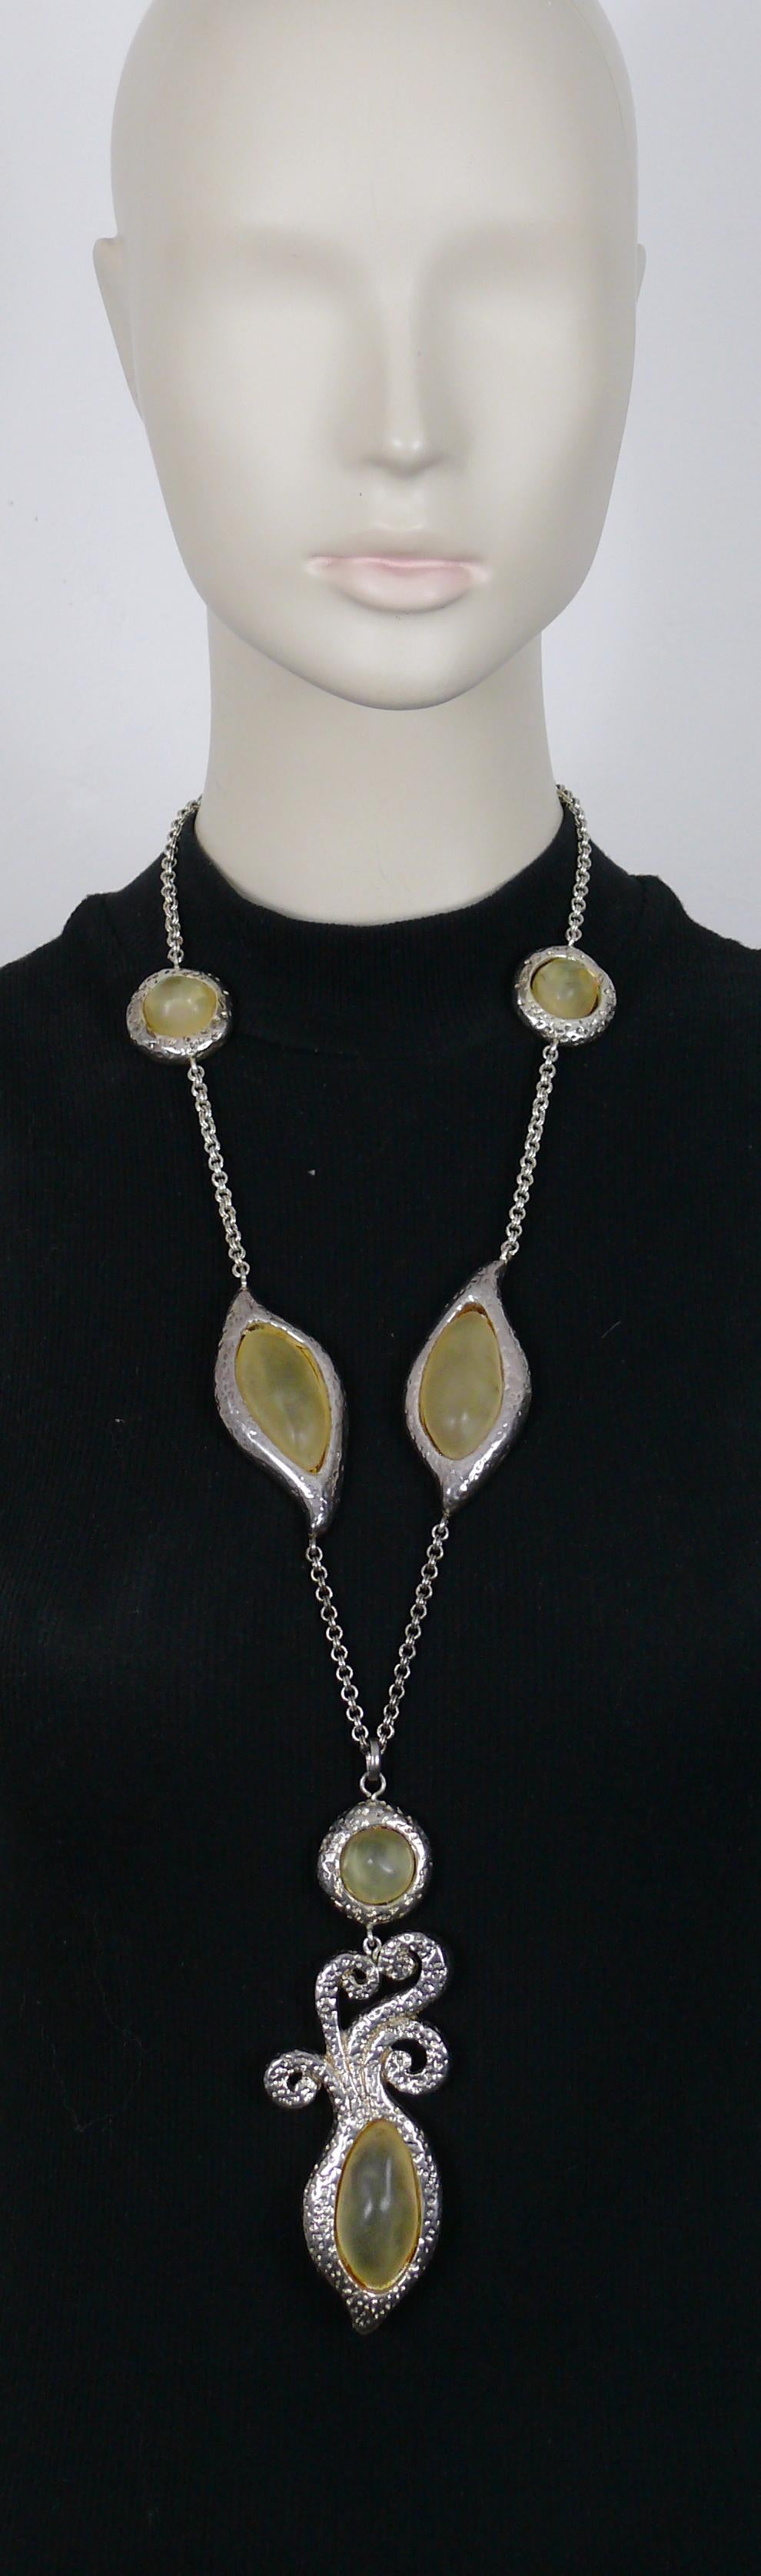 DOMINIQUE DENAIVE vintage textured silver toned necklace and dangling earrings (clip-on) set embellished with freeform shape yellow resin cabochons.

Silver tone metal hardware.

NECKLACE features a silver toned link chain, freeform shape textured